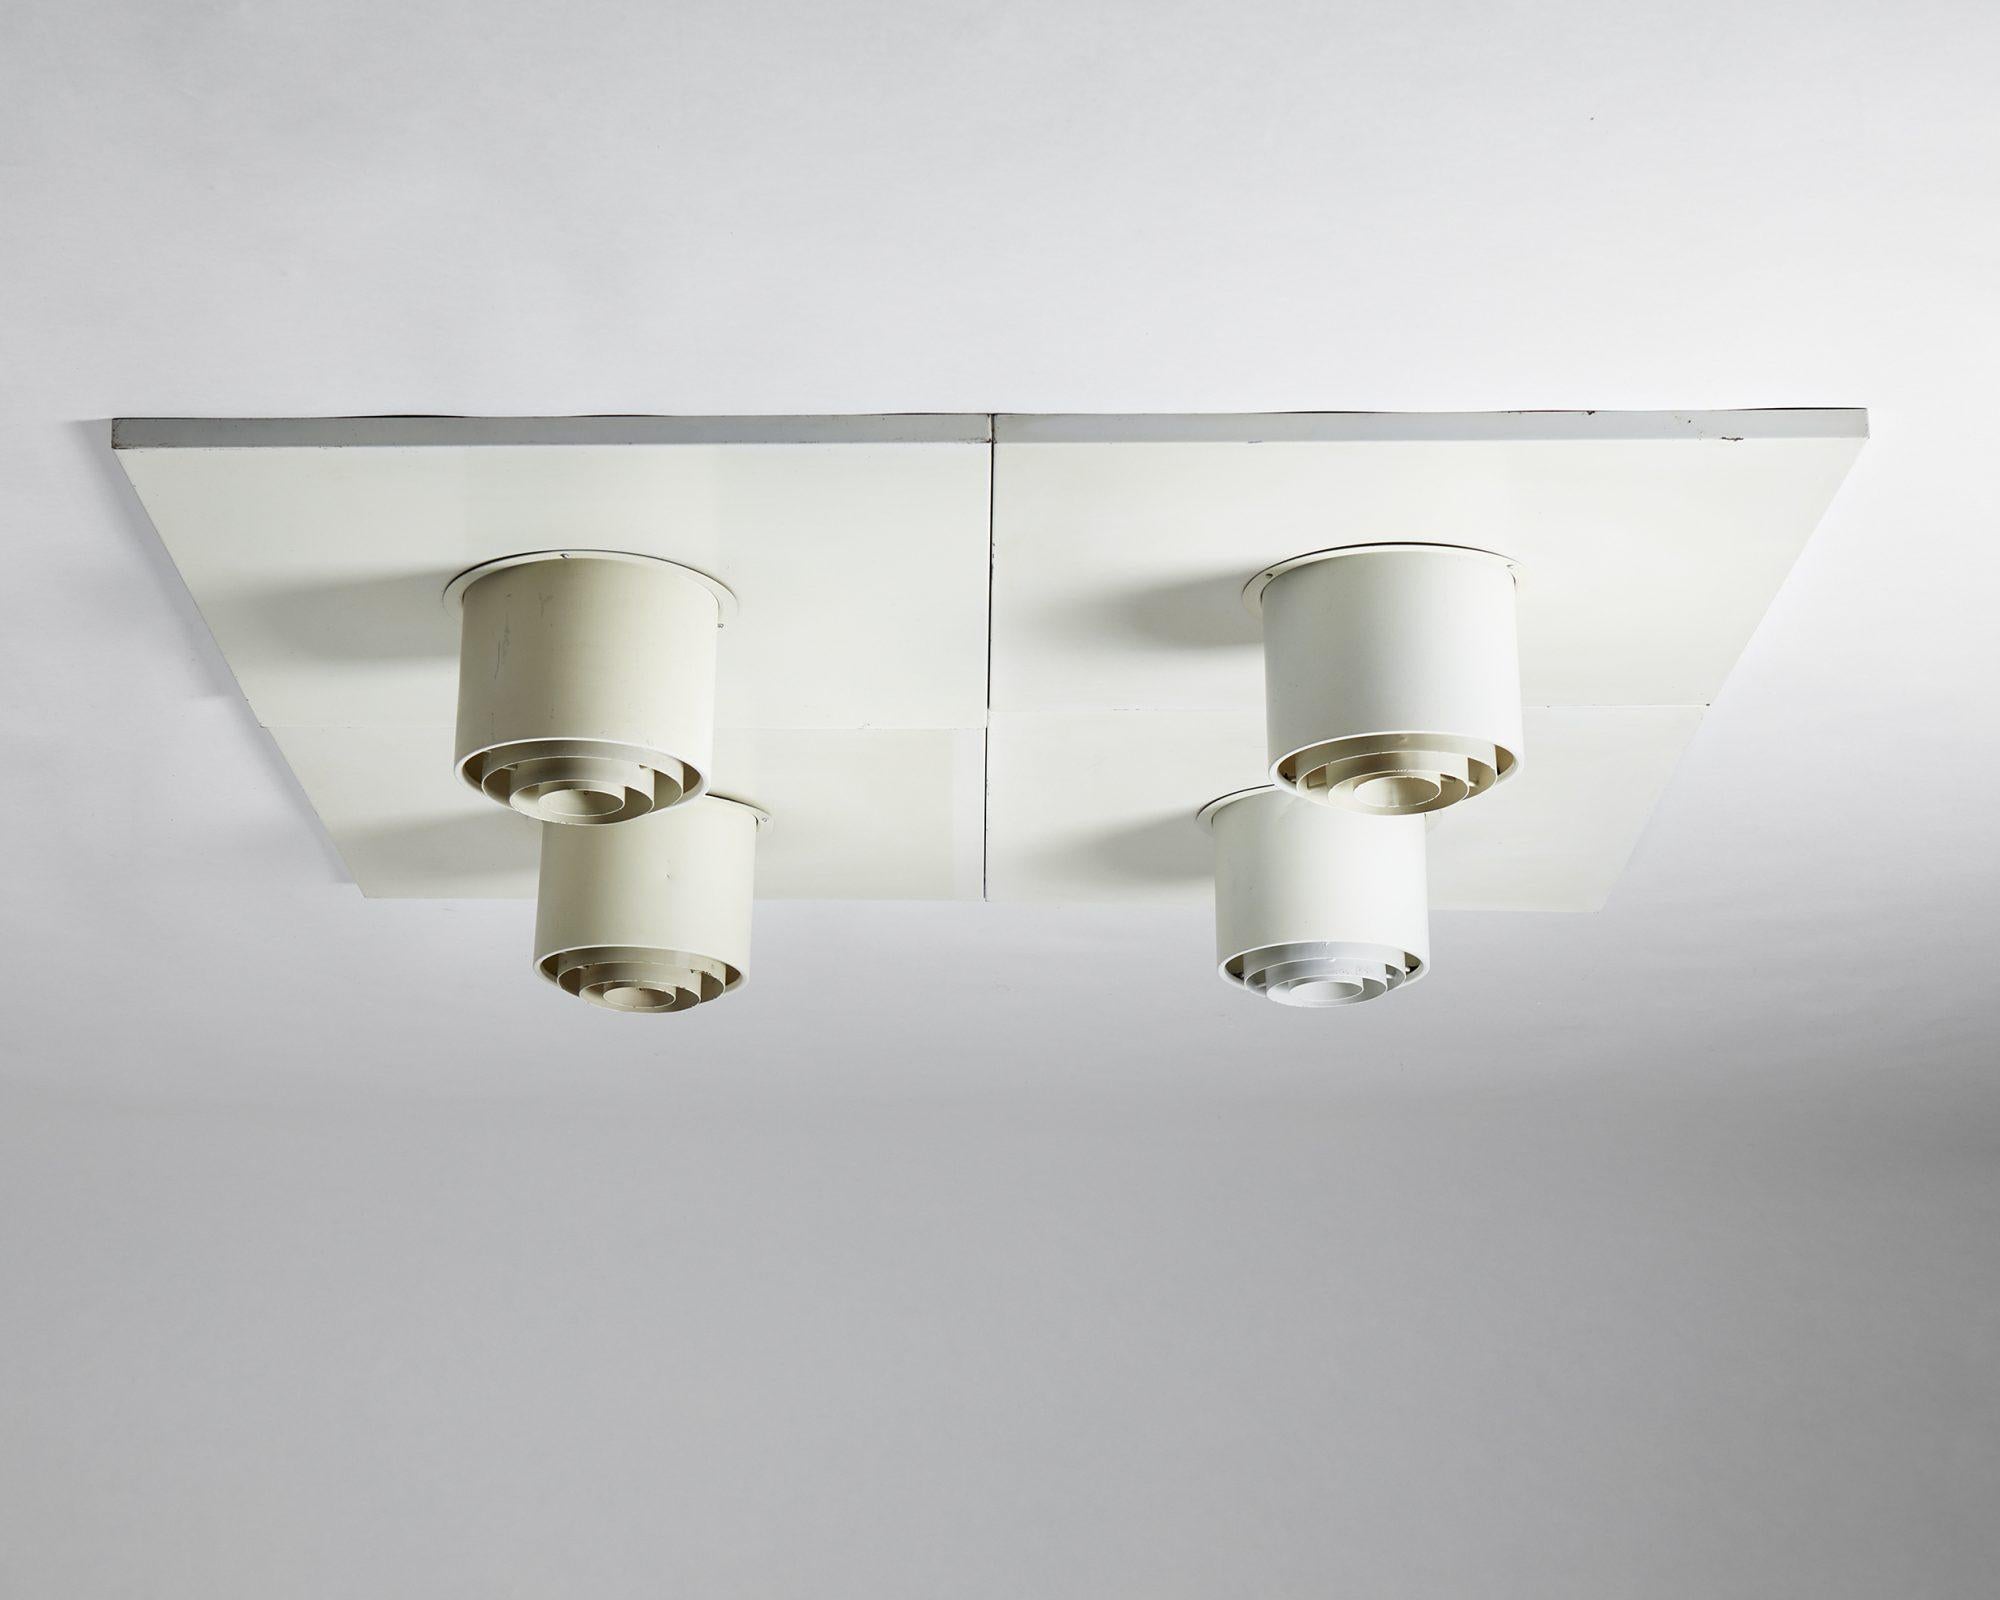 Painted Ceiling Lamp Designed by Alvar Aalto for Idman